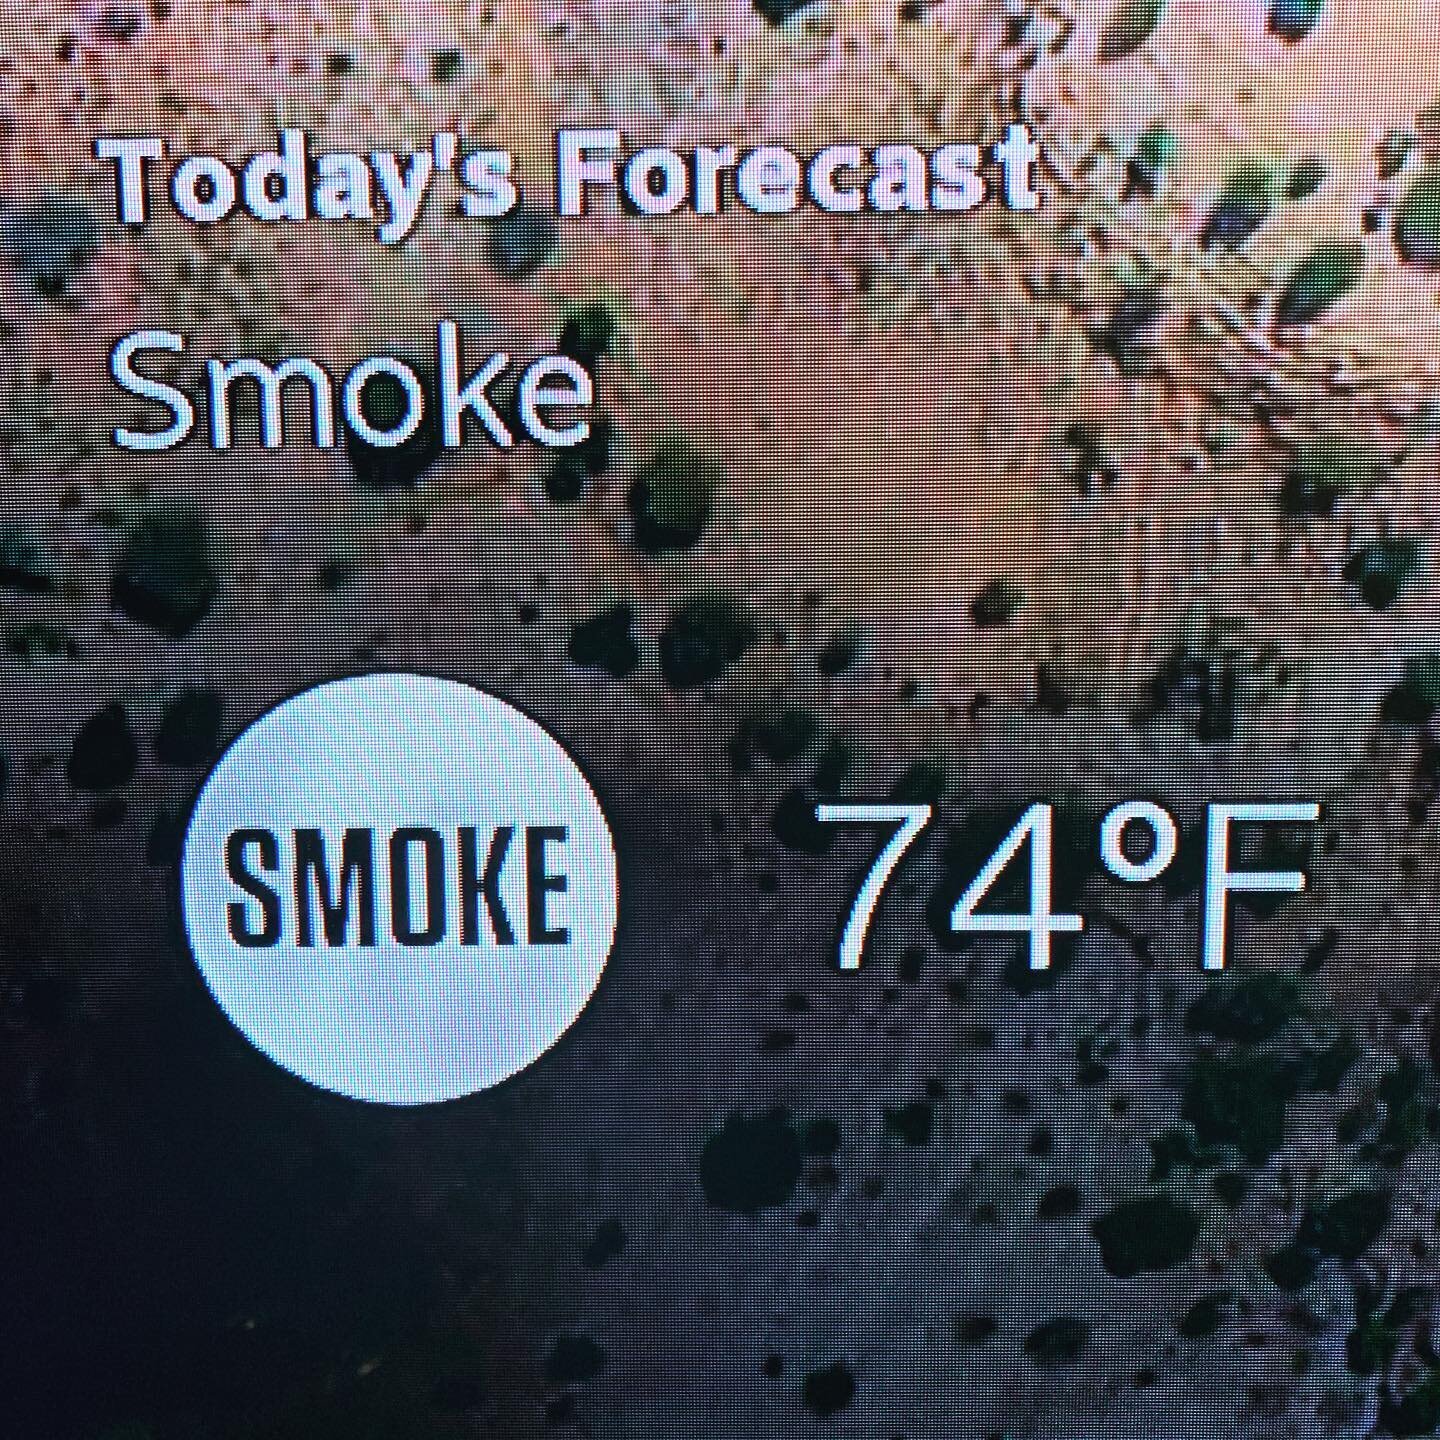 I&rsquo;ve never seen a forecast simply say &ldquo;smoke&rdquo; before. Surrounded by fires 😕. Stay safe folks.